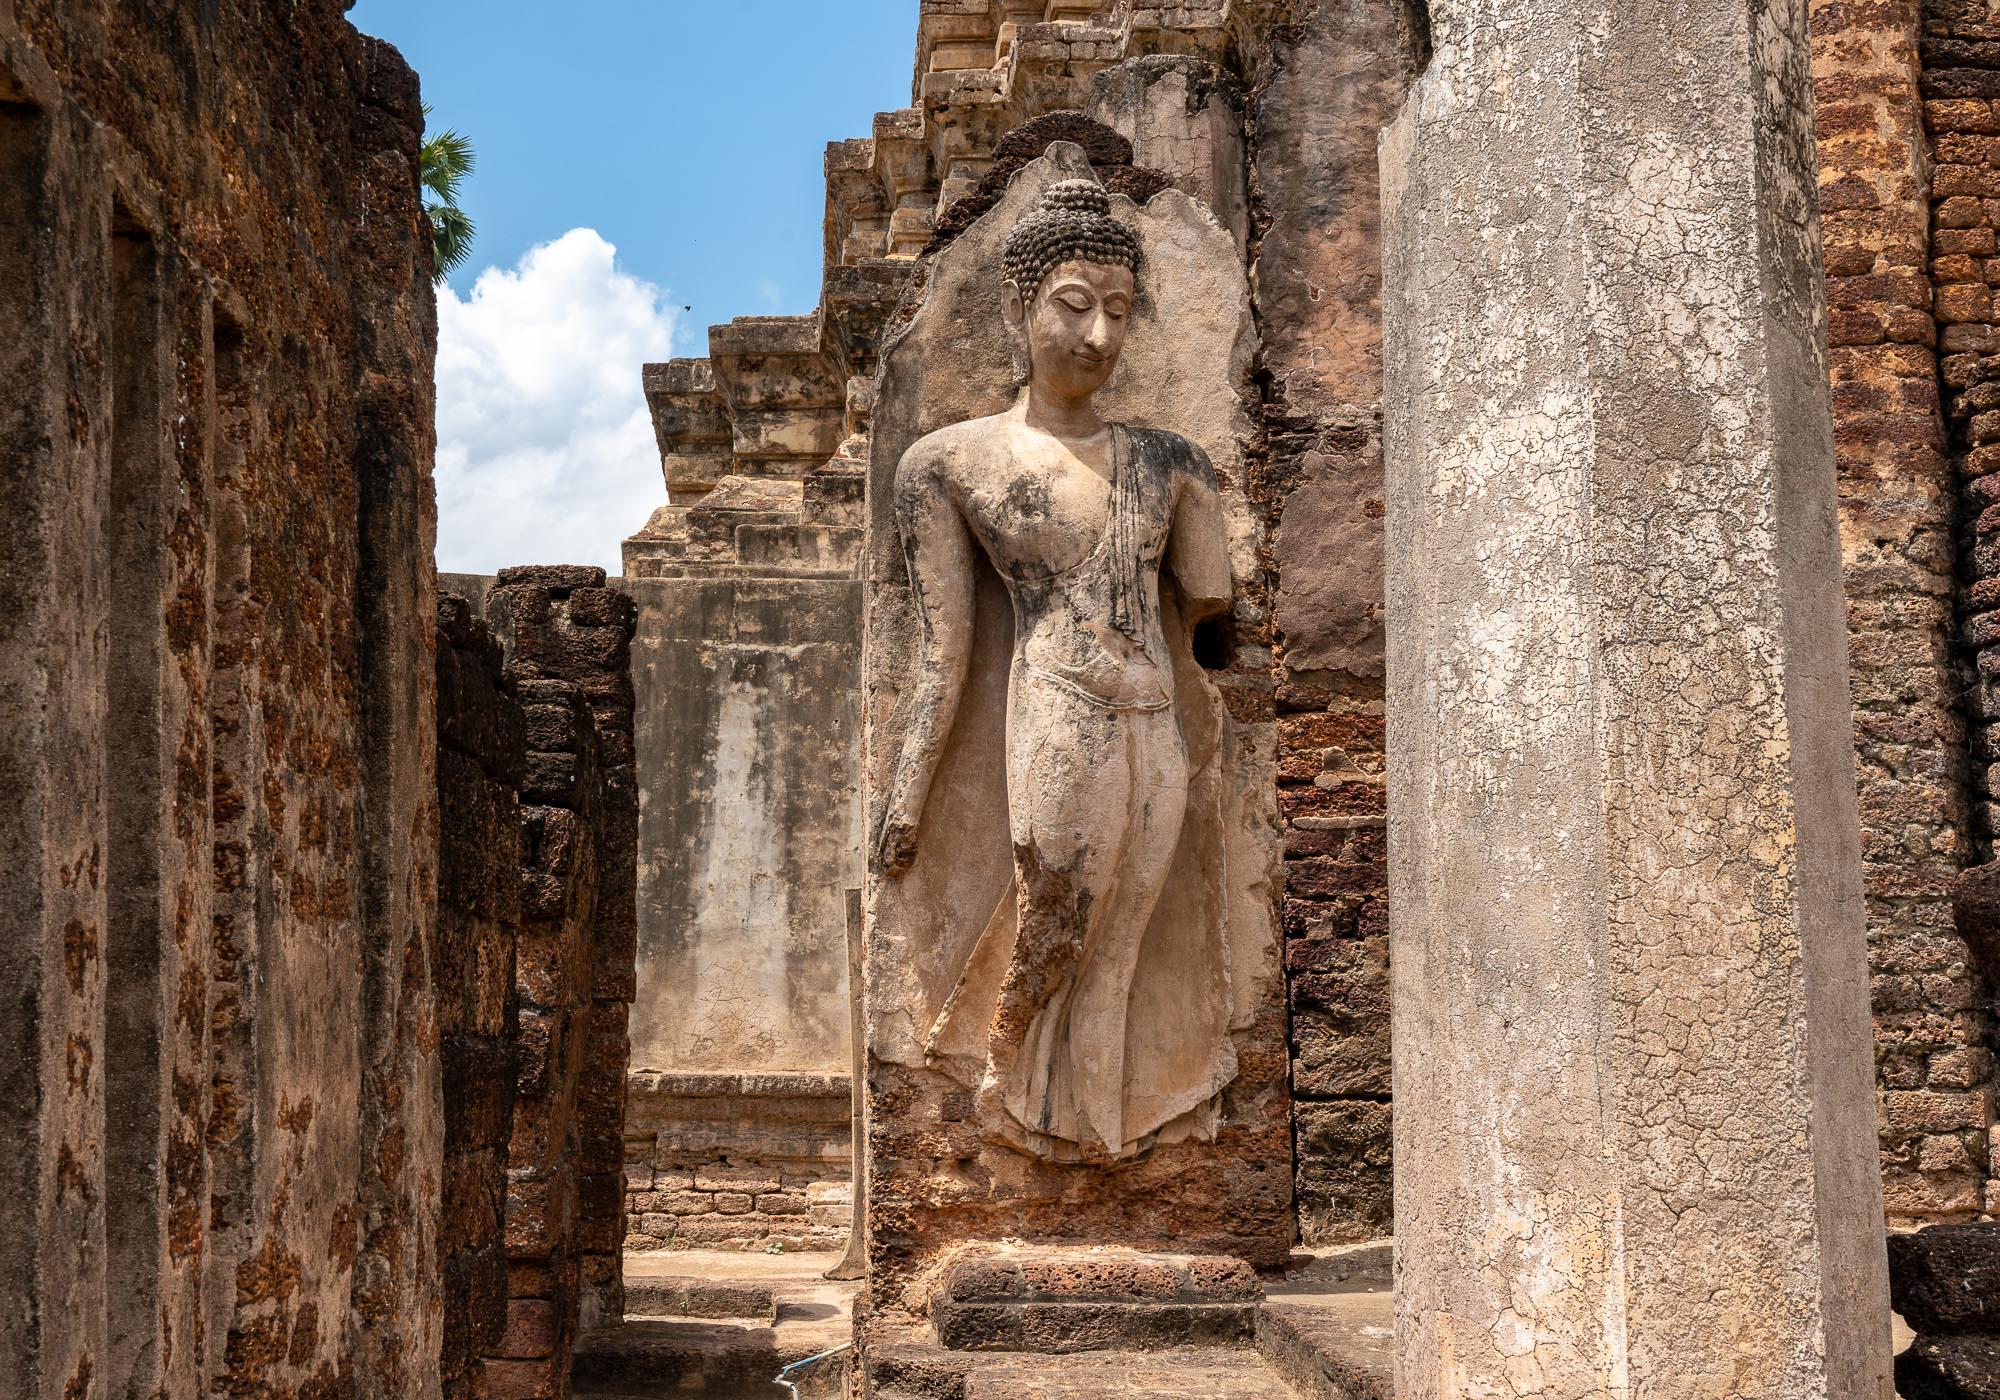 The famous statue of a smiling walking Buddha, which is one of Si Satchanalai's most important artworks. – © Michael Turtle